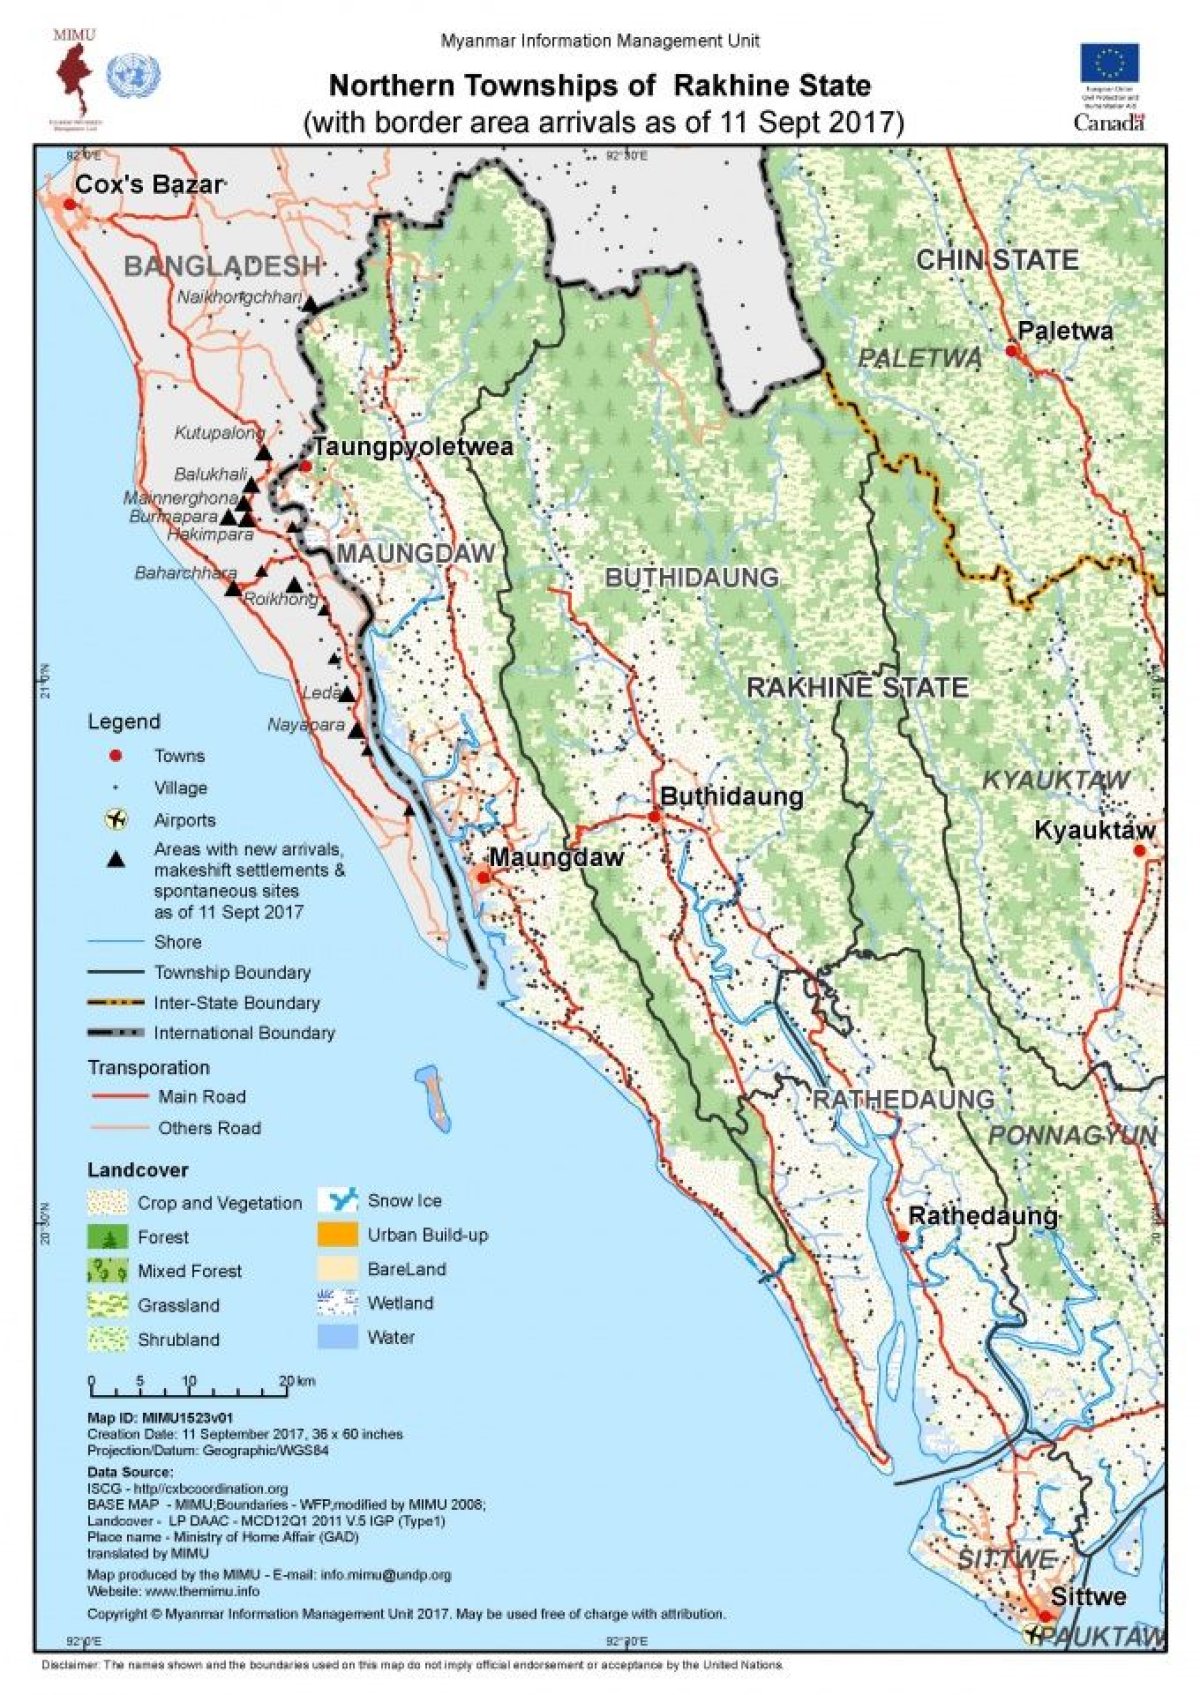 State_Map_TS_Northern_Townships_of_Rakhine_State_with_border_areas_as_of_11Sept2017_MIMU1523v01_14Sep2017_A4_0